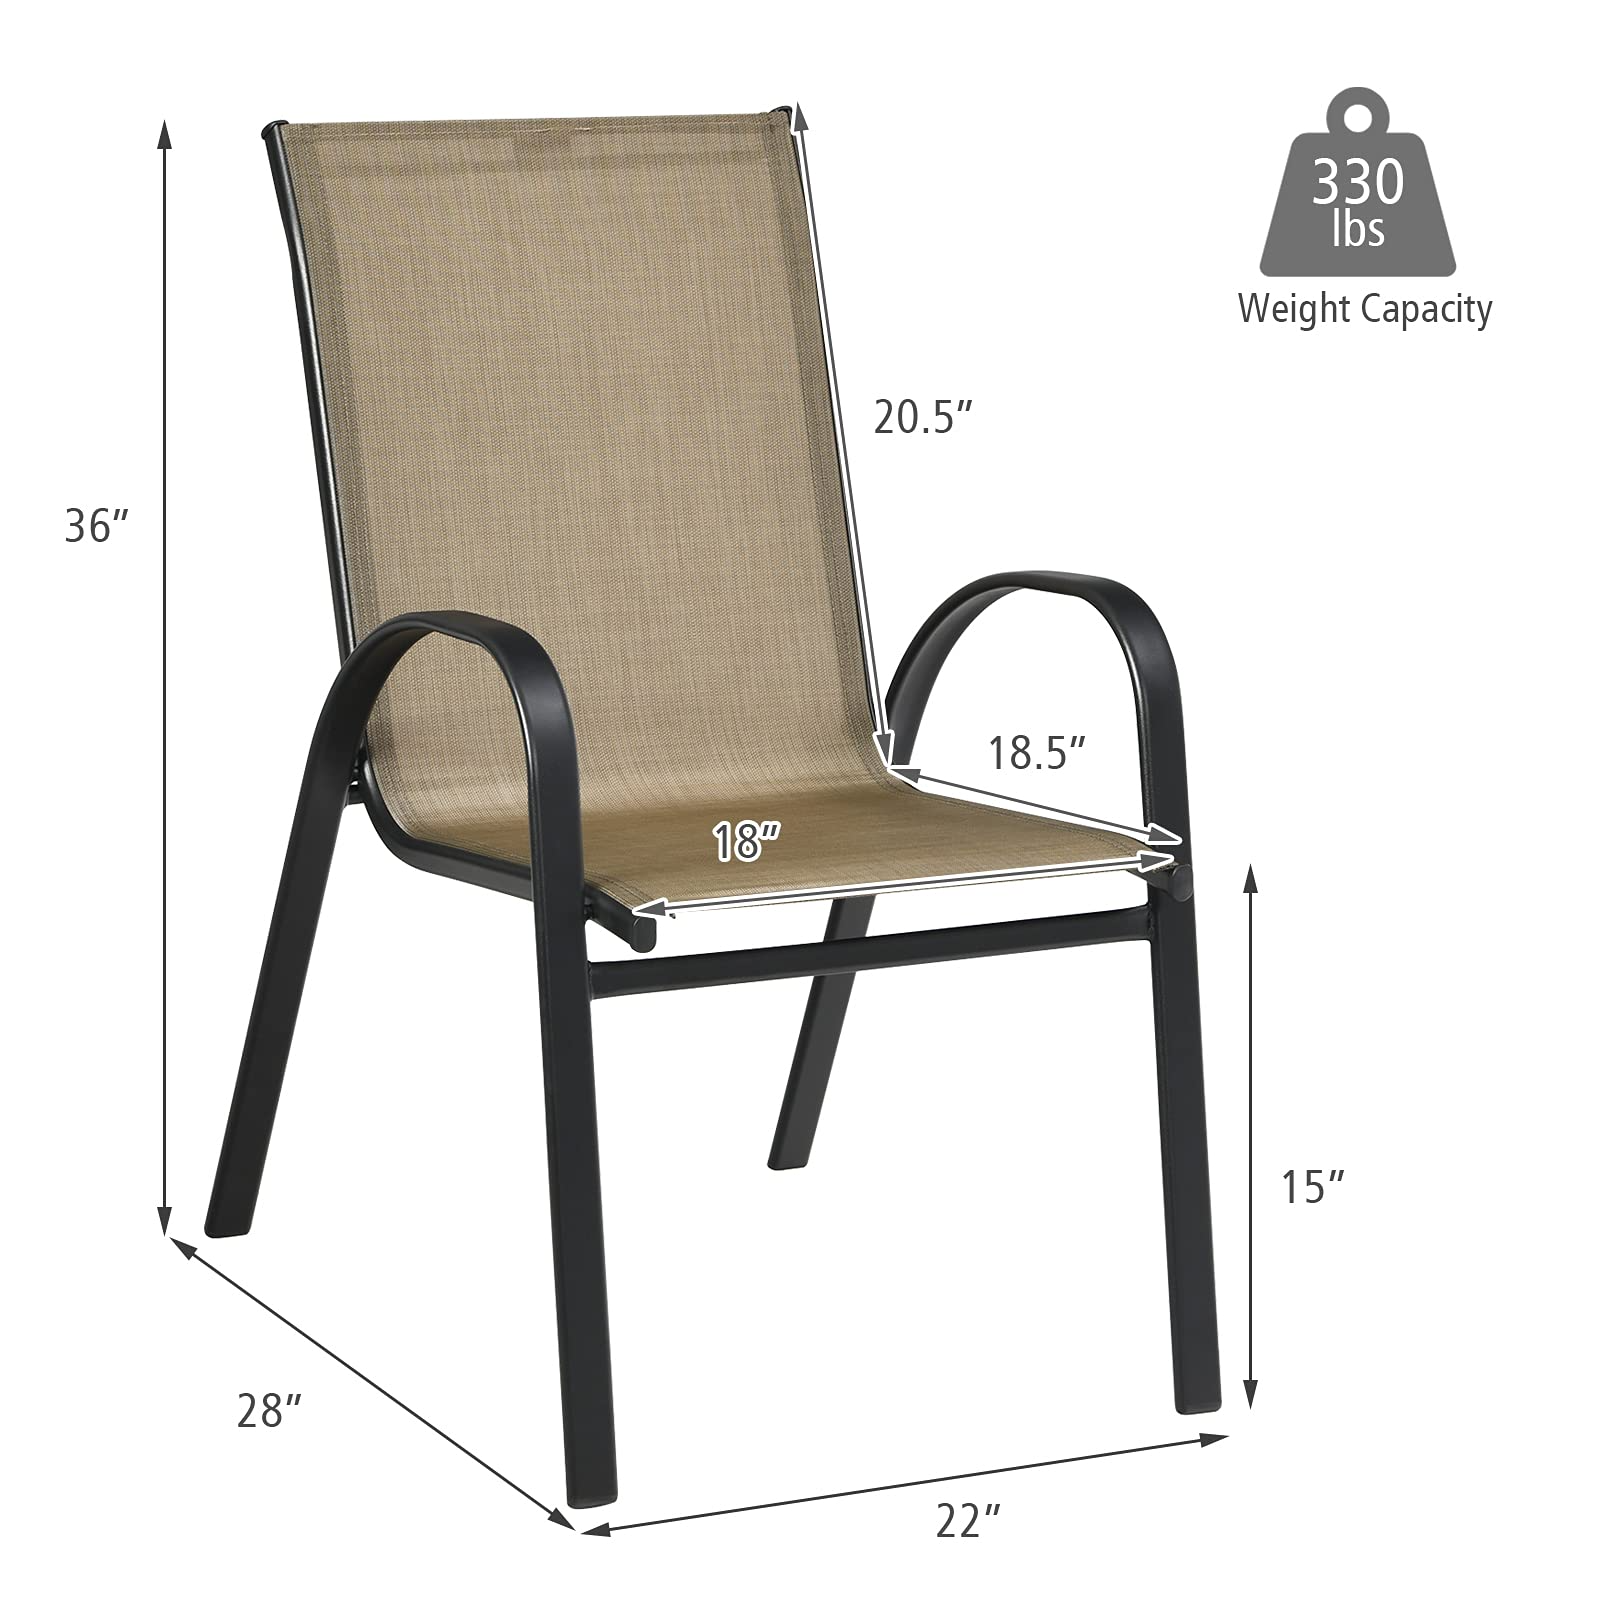 Giantex Space Saving Outdoor Camping Chairs with Armrest High Backrest for Deck Pool Beach Yard